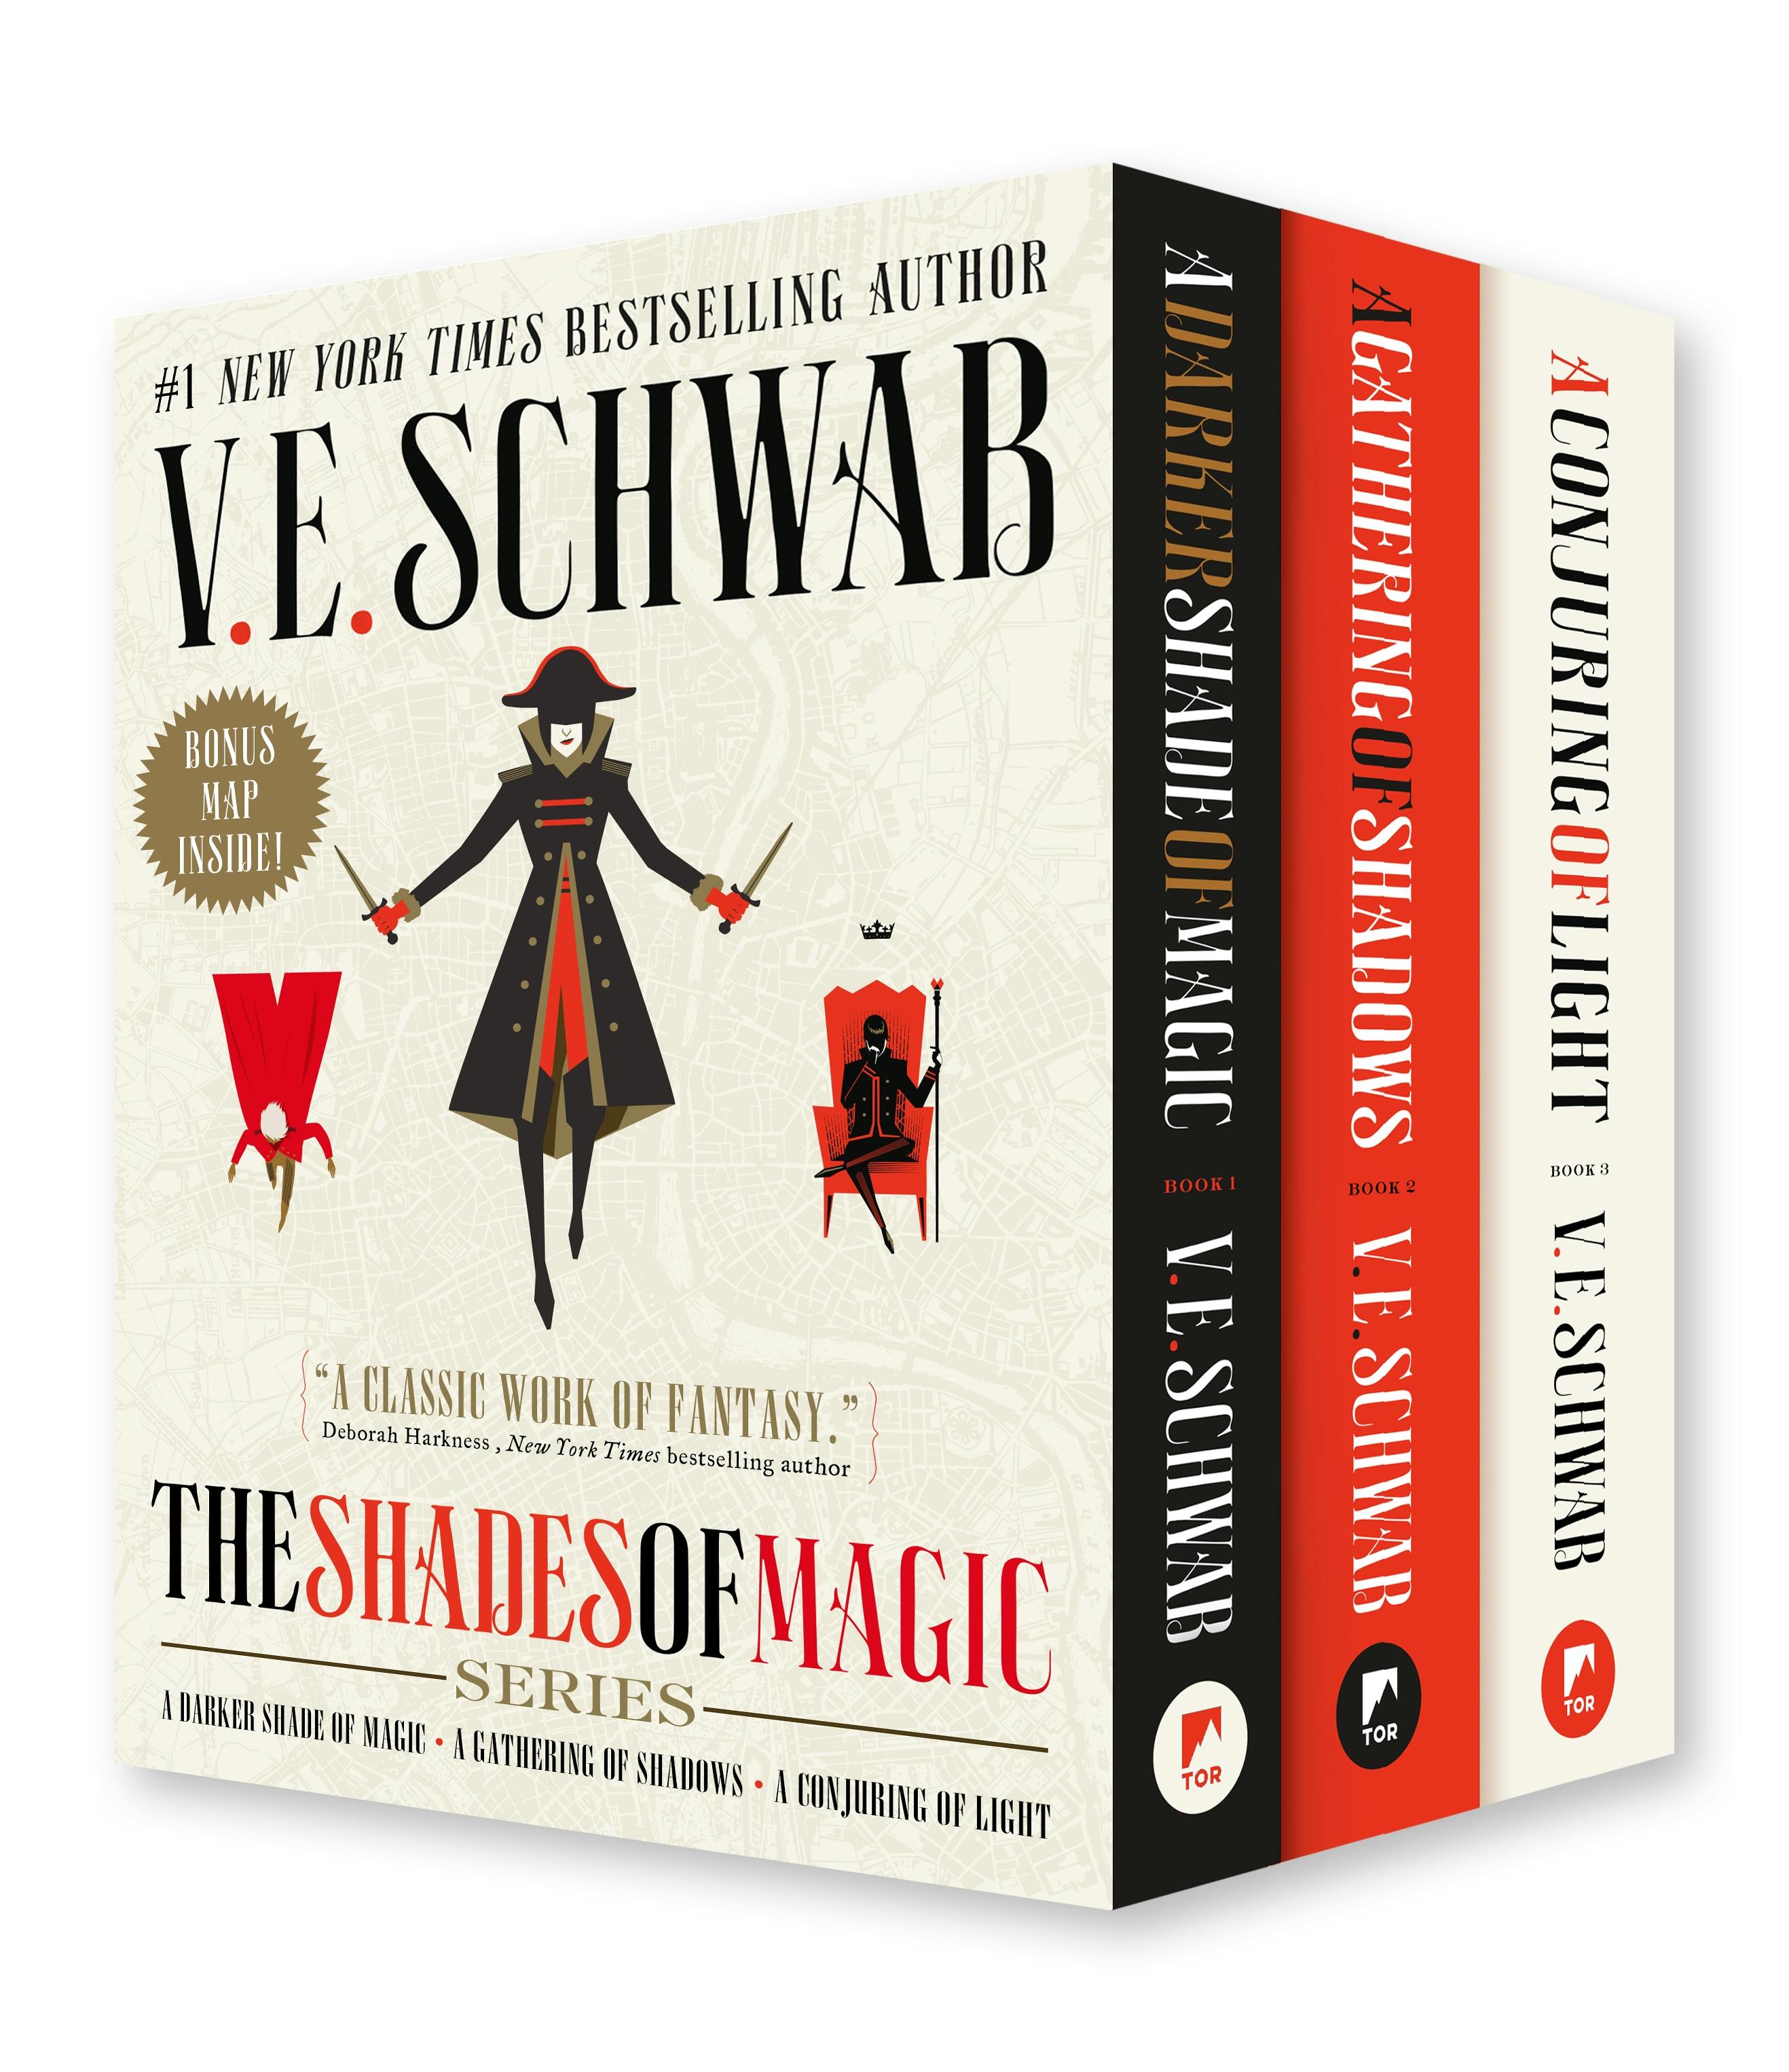 Cover for the book titled as: Shades of Magic Boxed Set